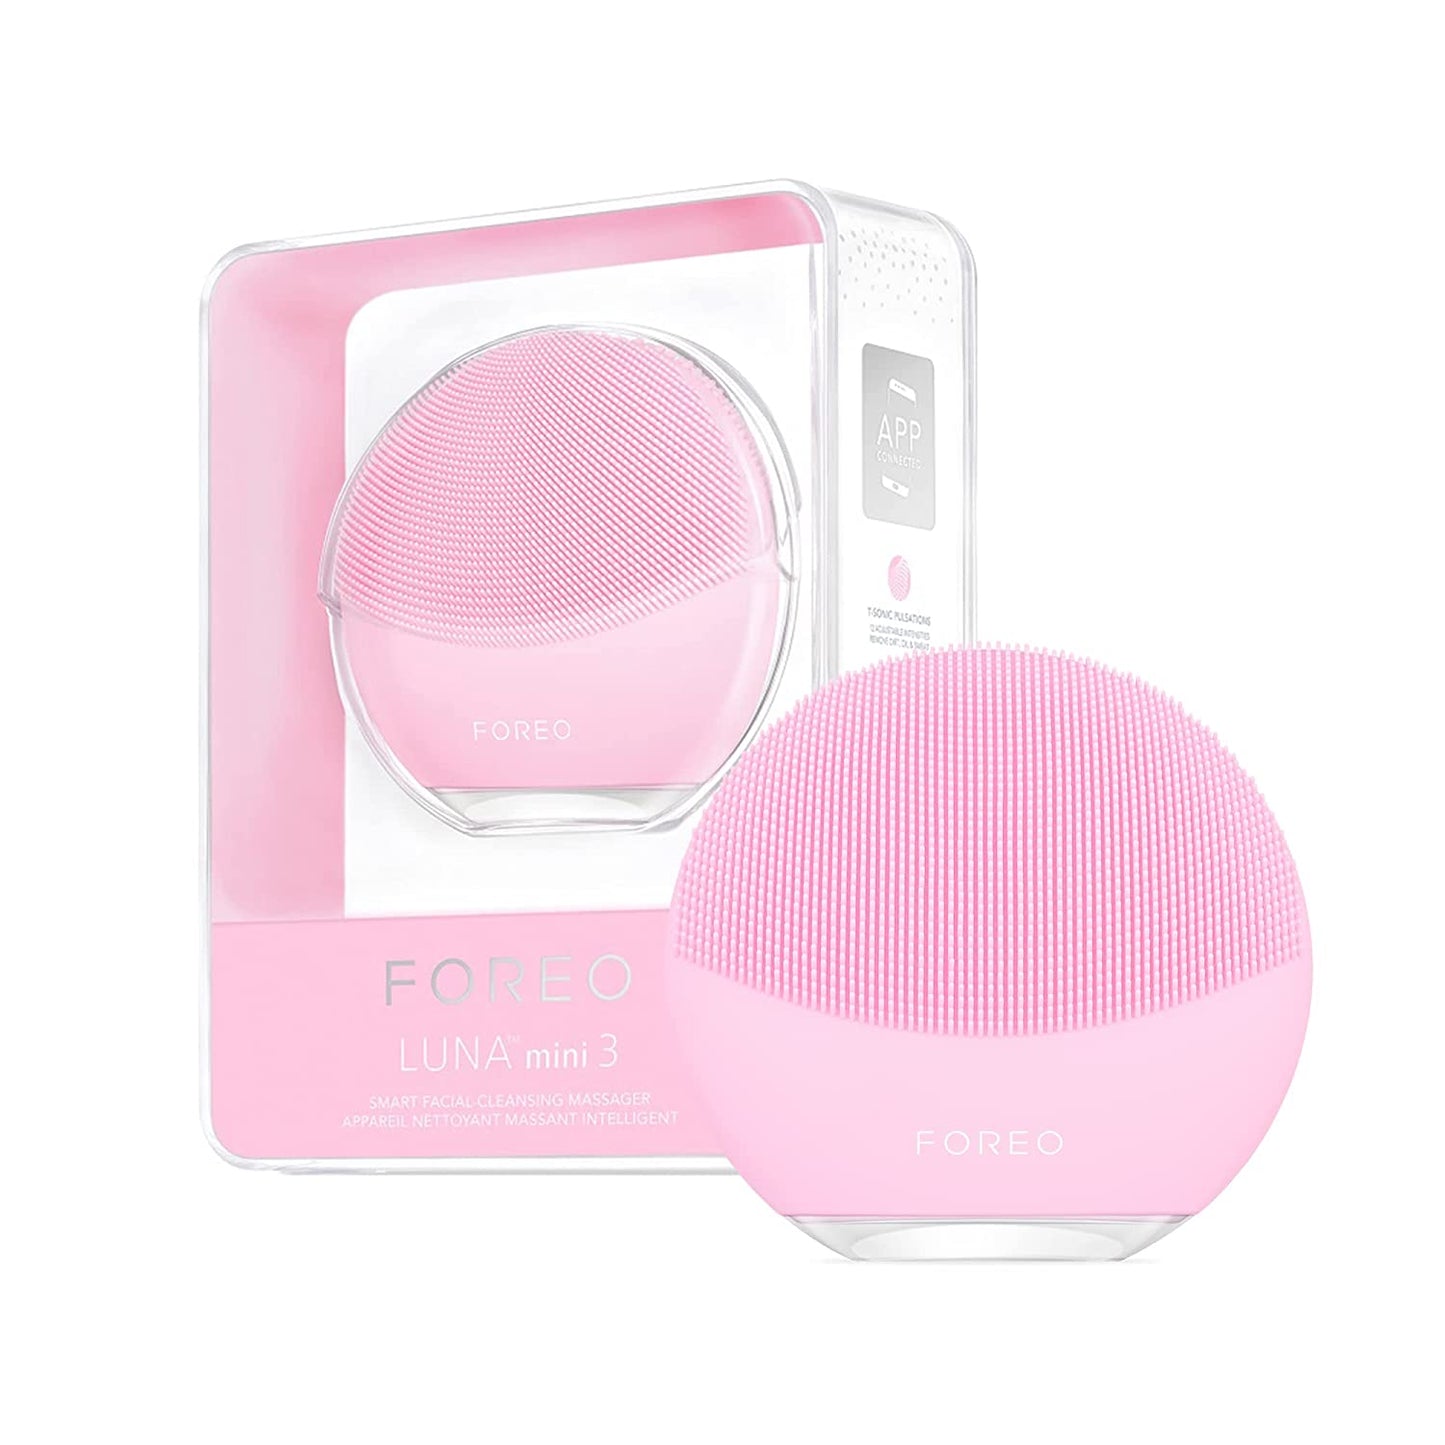 FOREO LUNA Mini 3 Waterproof Silicone Face Cleansing Brush